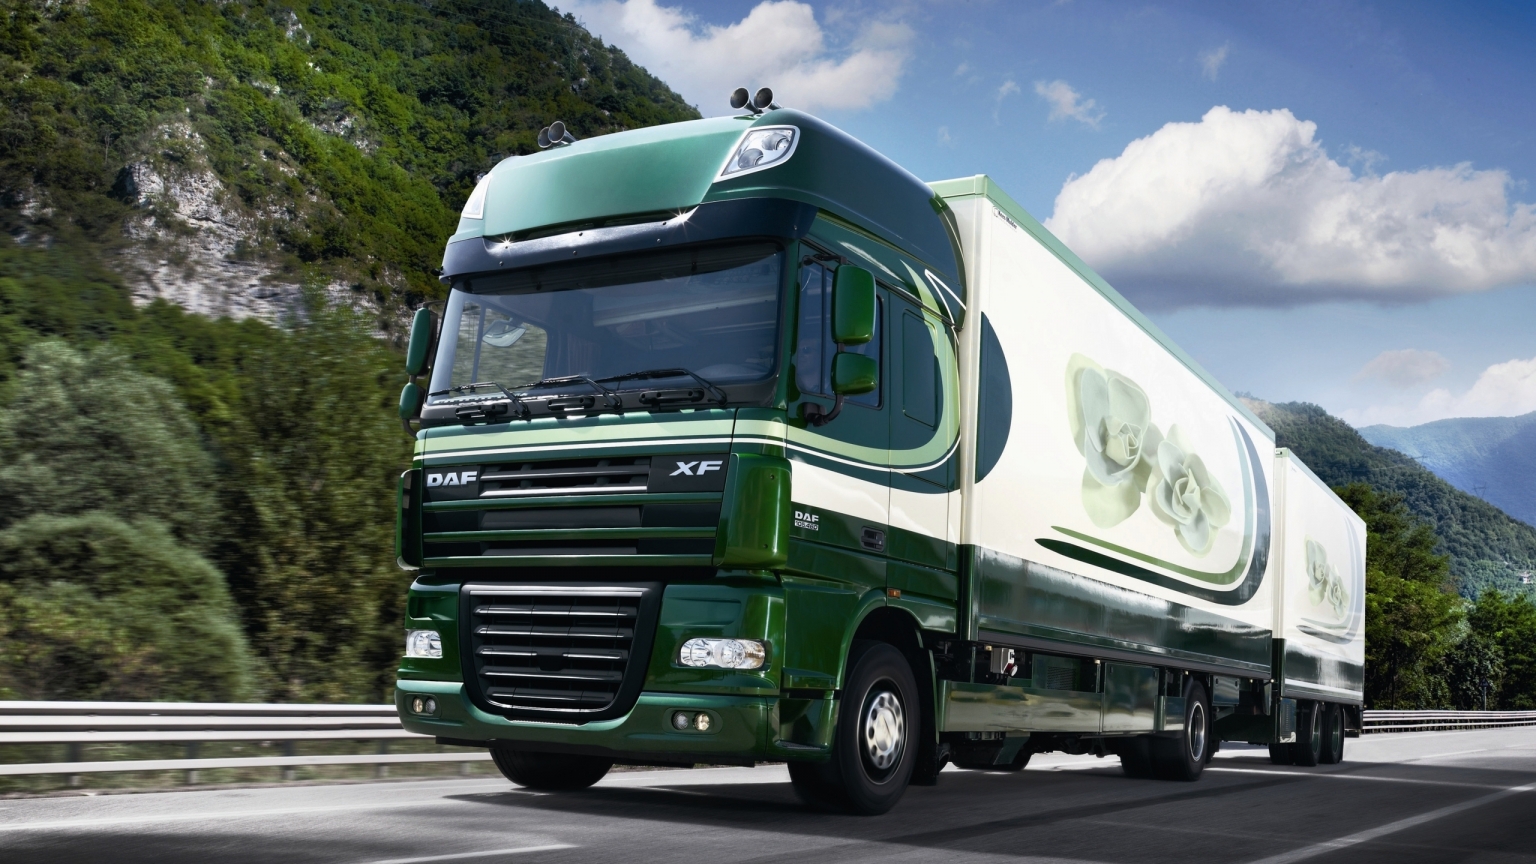 DAF XF 105 Truck for 1536 x 864 HDTV resolution